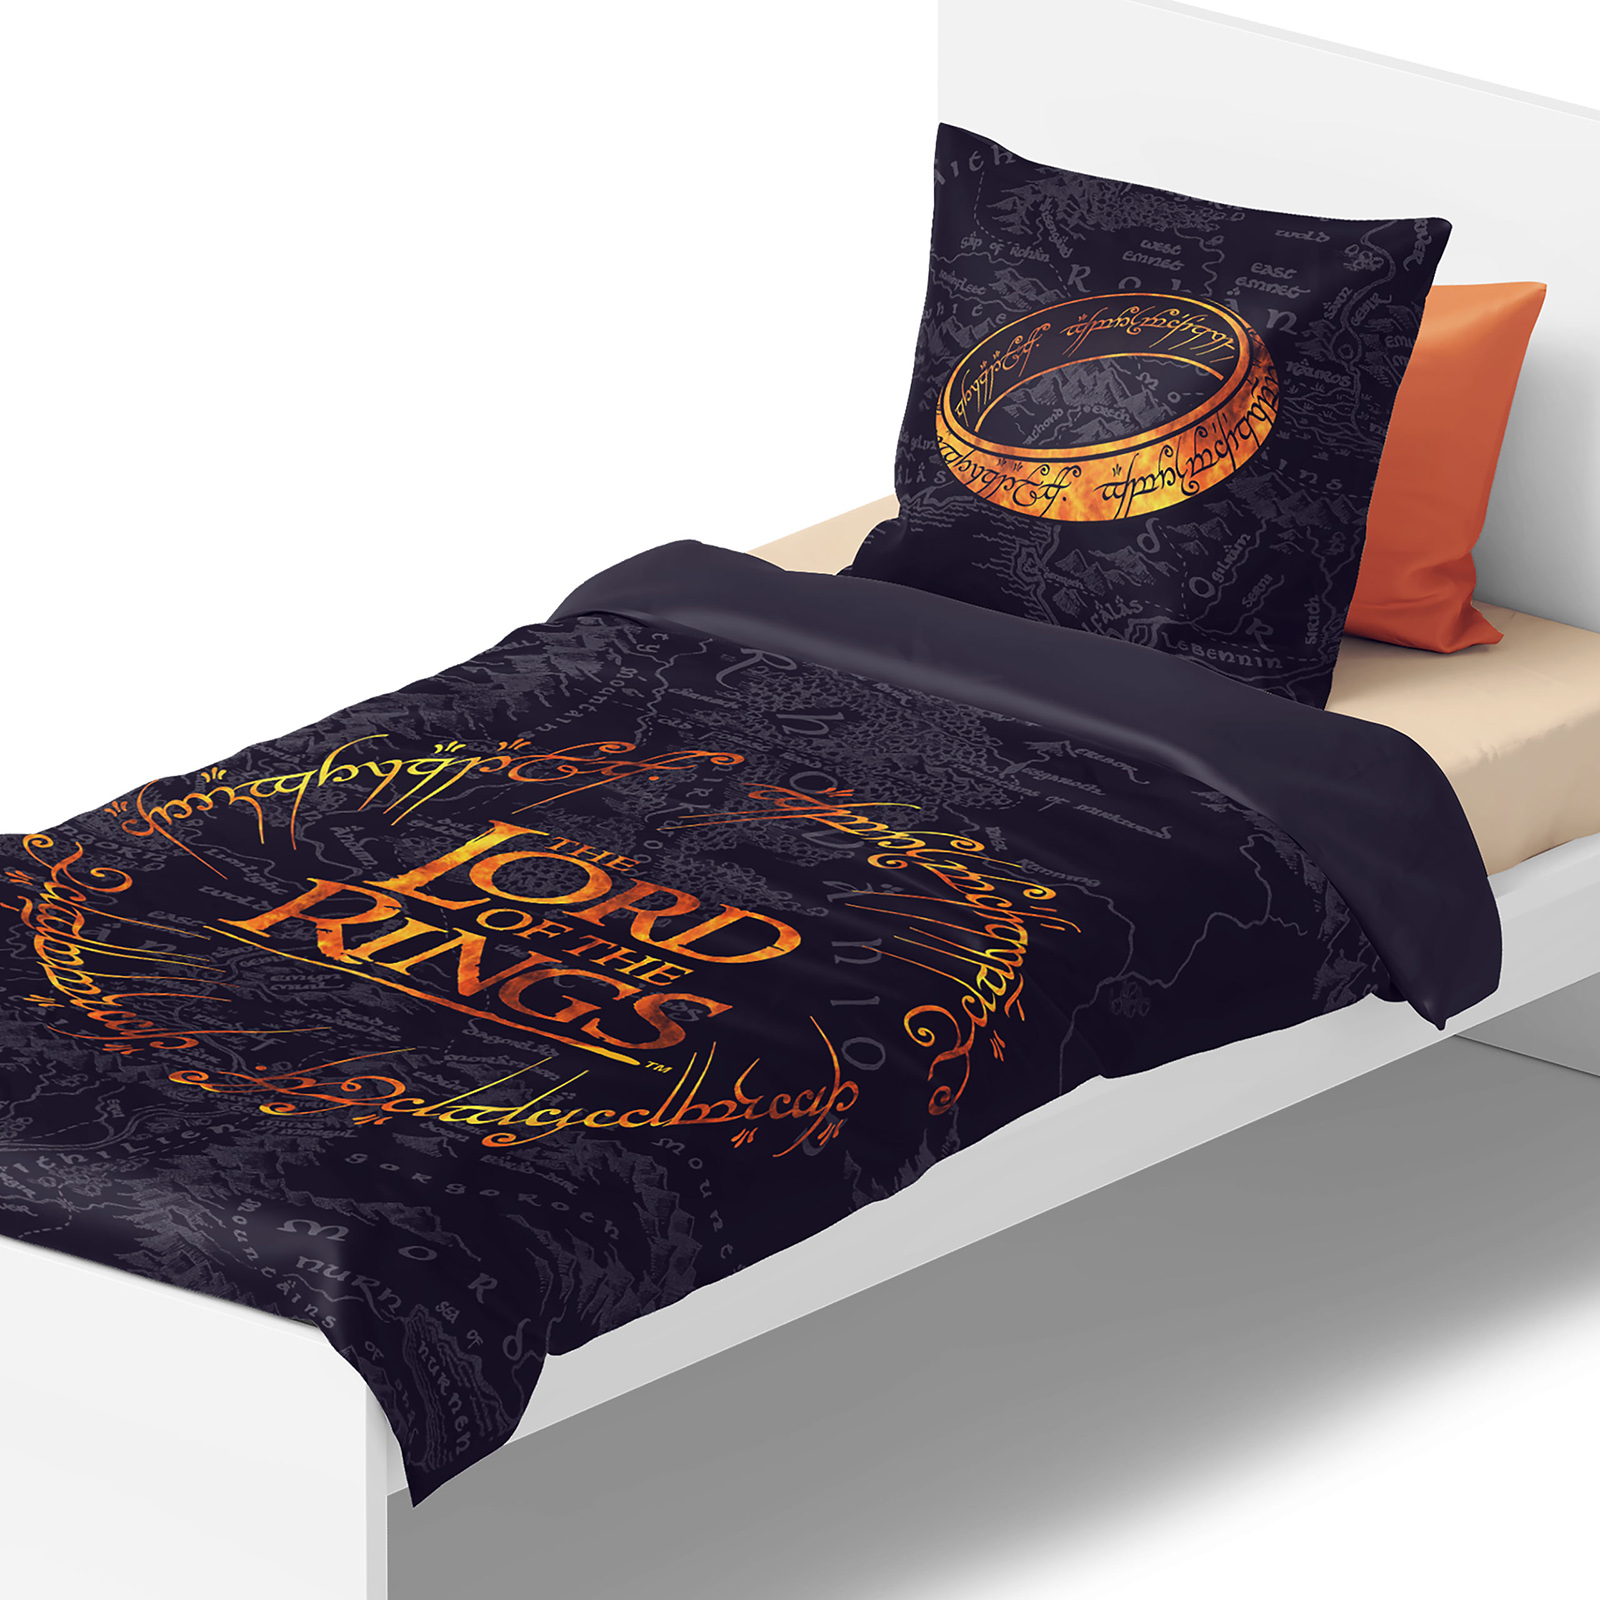 Lord of the Rings - The One Ring Bedding Black